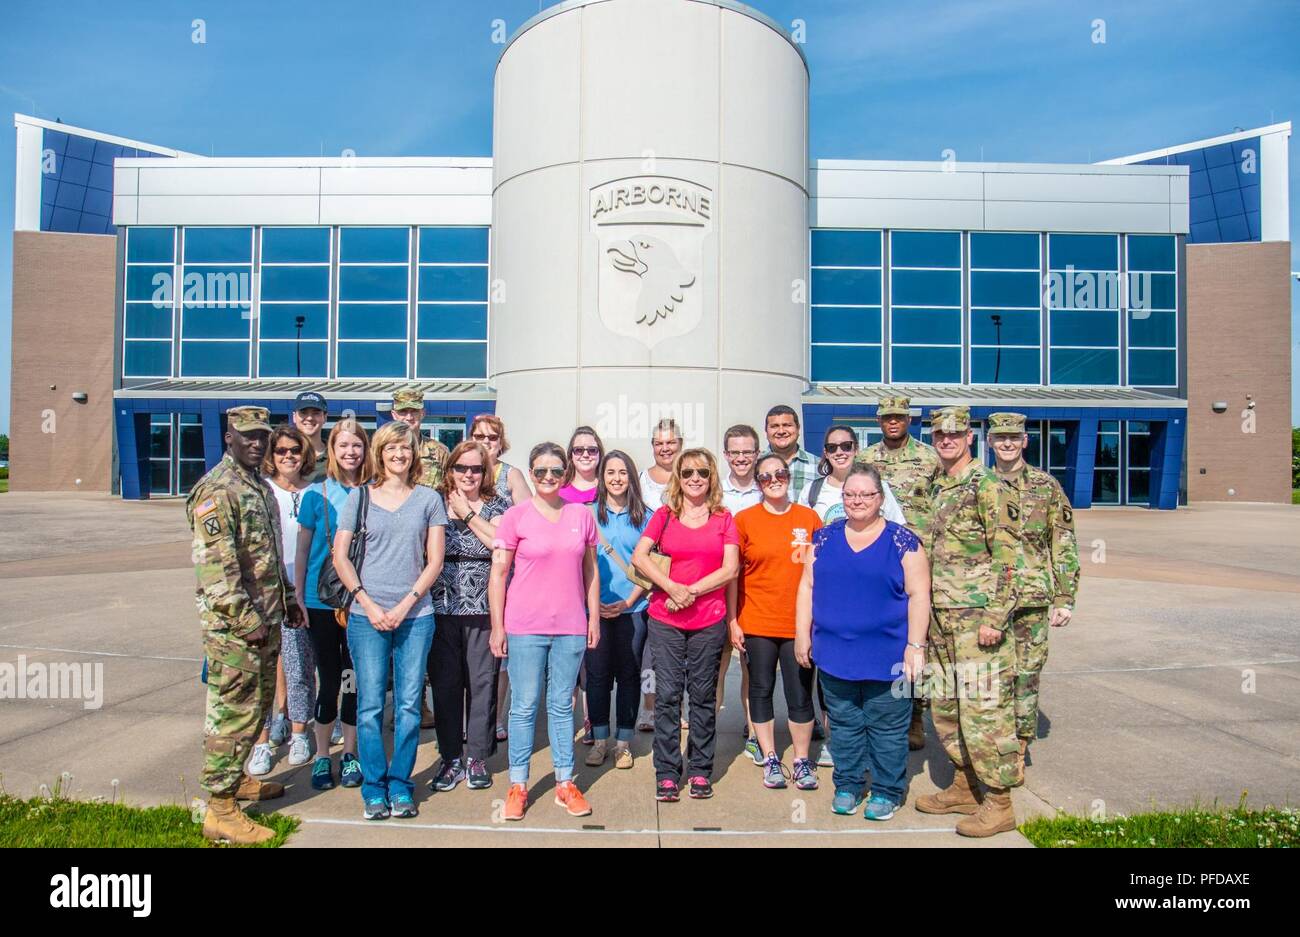 The staff office of United States Attorney for the Middle District of Tennessee Donald Q. Cochran visited Fort Campbell on June 6. The base opened its doors to the staff office of Mr. Cochran to see a glimpse of what it’s like to be a Soldier of the 101st Airborne Division. Stock Photo